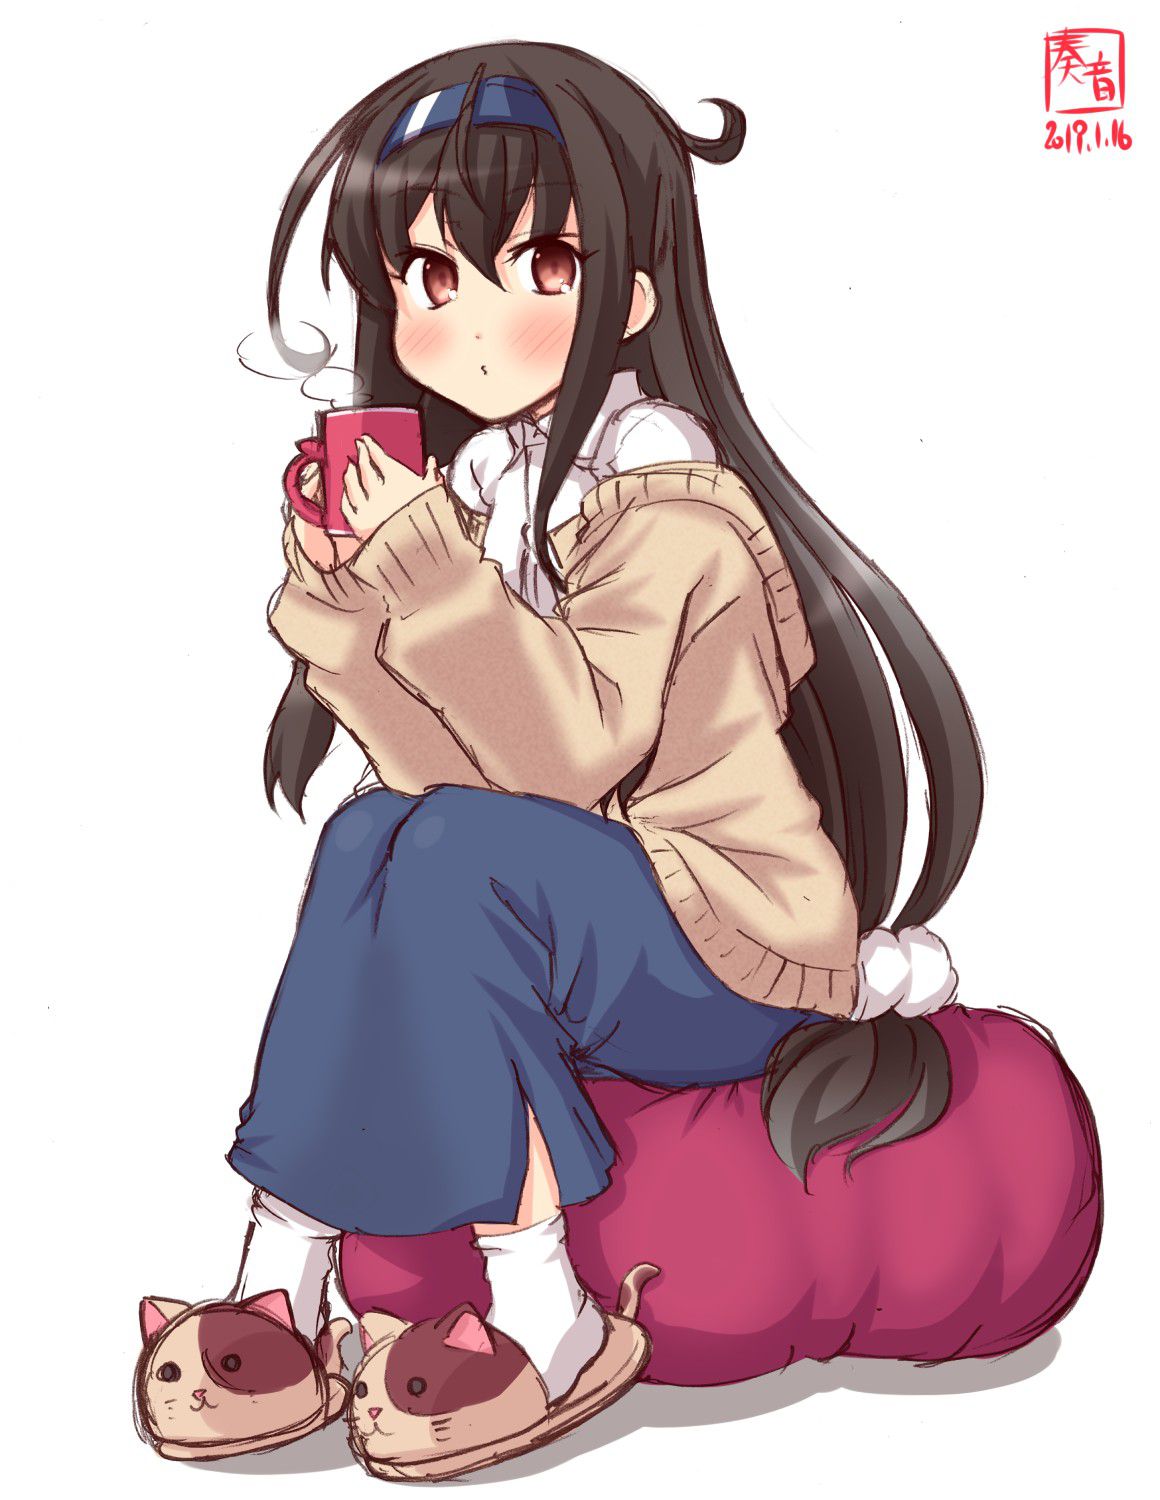 Secondary image of a cute girl who is drinking a drink [non-erotic] 7